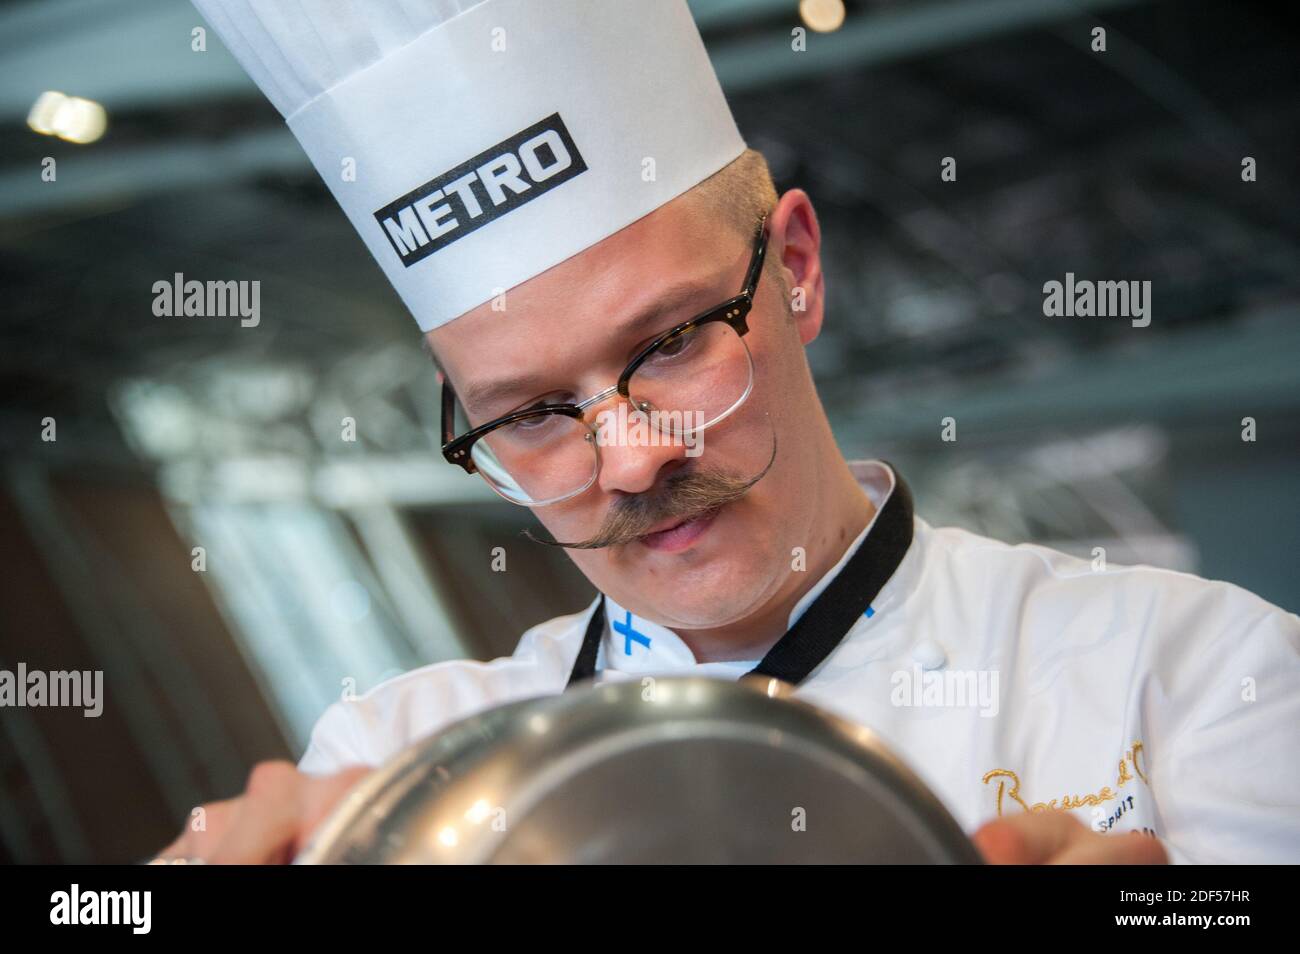 06/12/2018 Turin (Italy) Ismo Sipelainen engaged in the preparation of a refined dish during the Bocuse d'Or Stock Photo